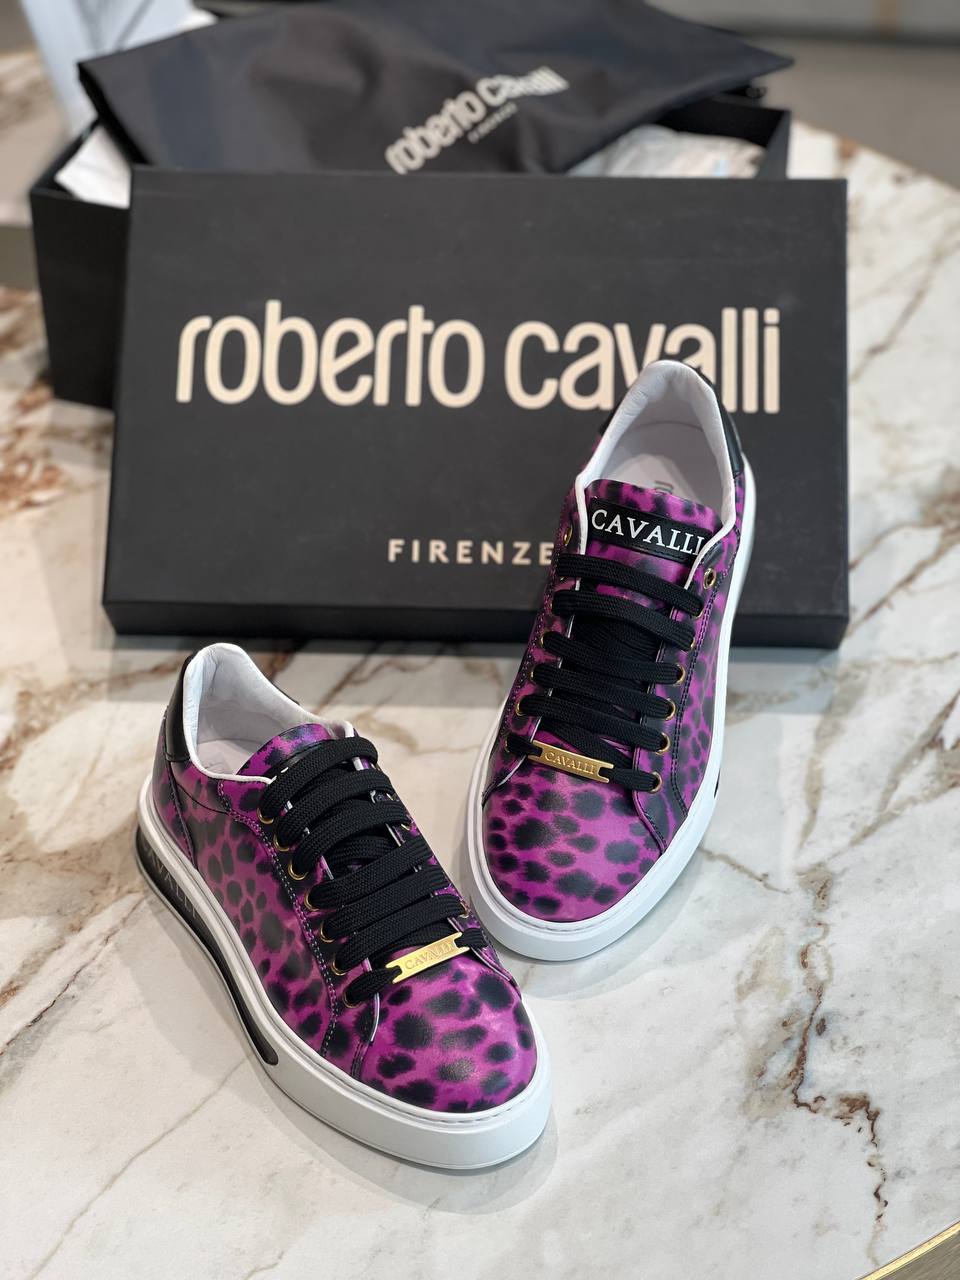 Roberto Cavalli Outlets 5098